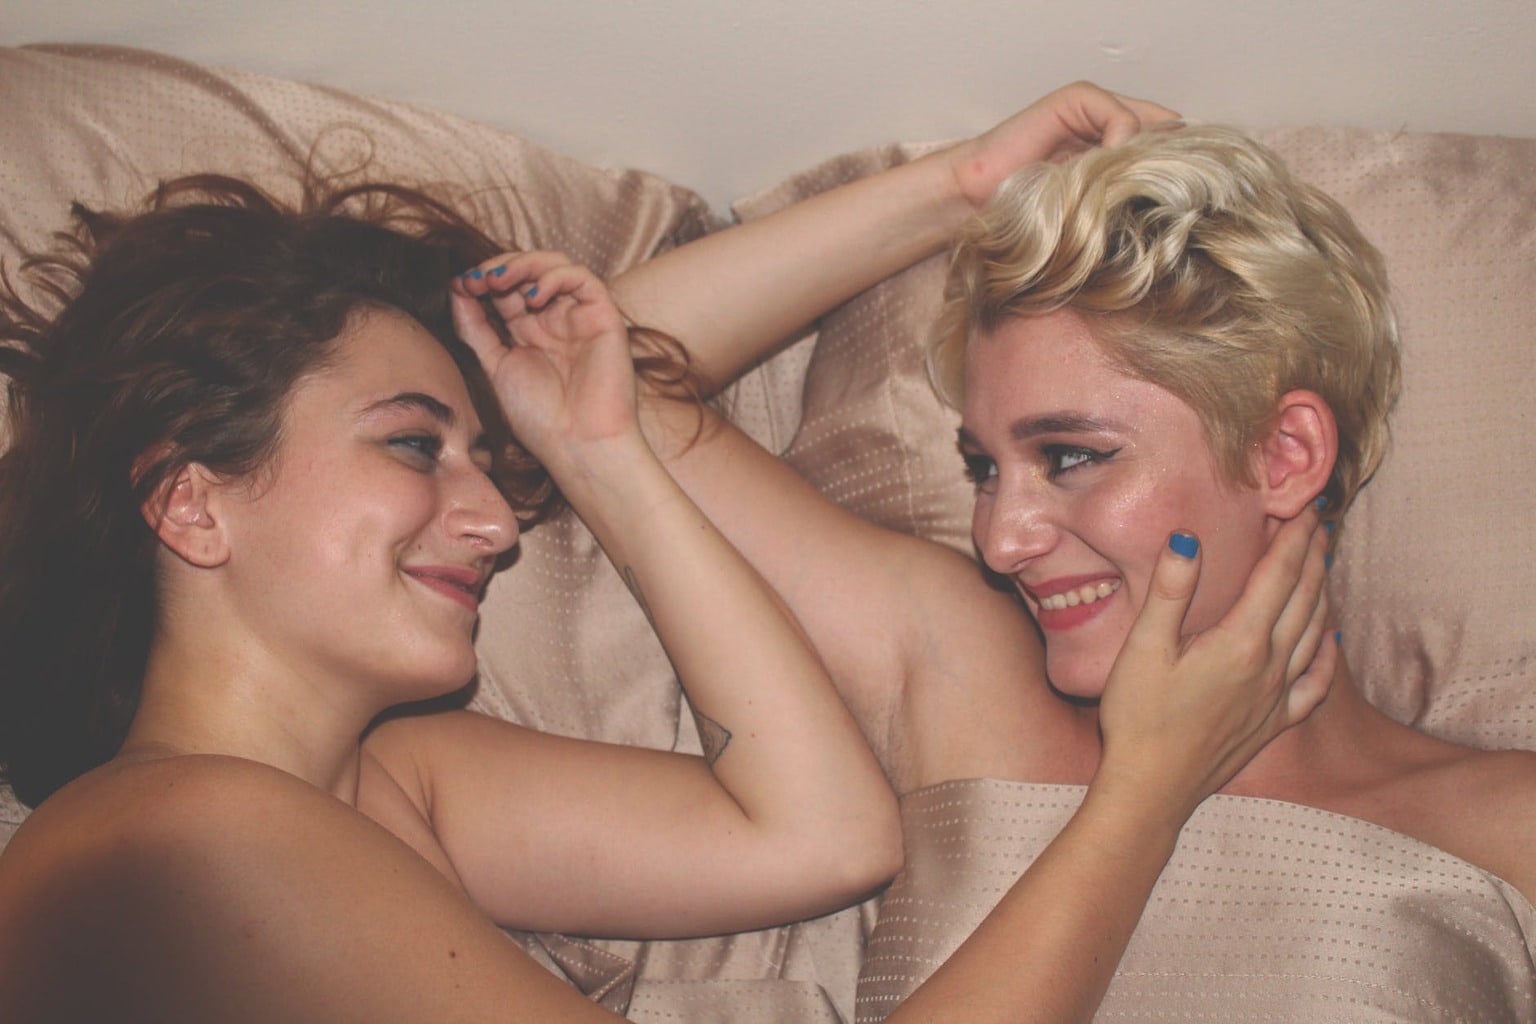 Girl with brown hair in bed with girl with short blonde hair with half on face